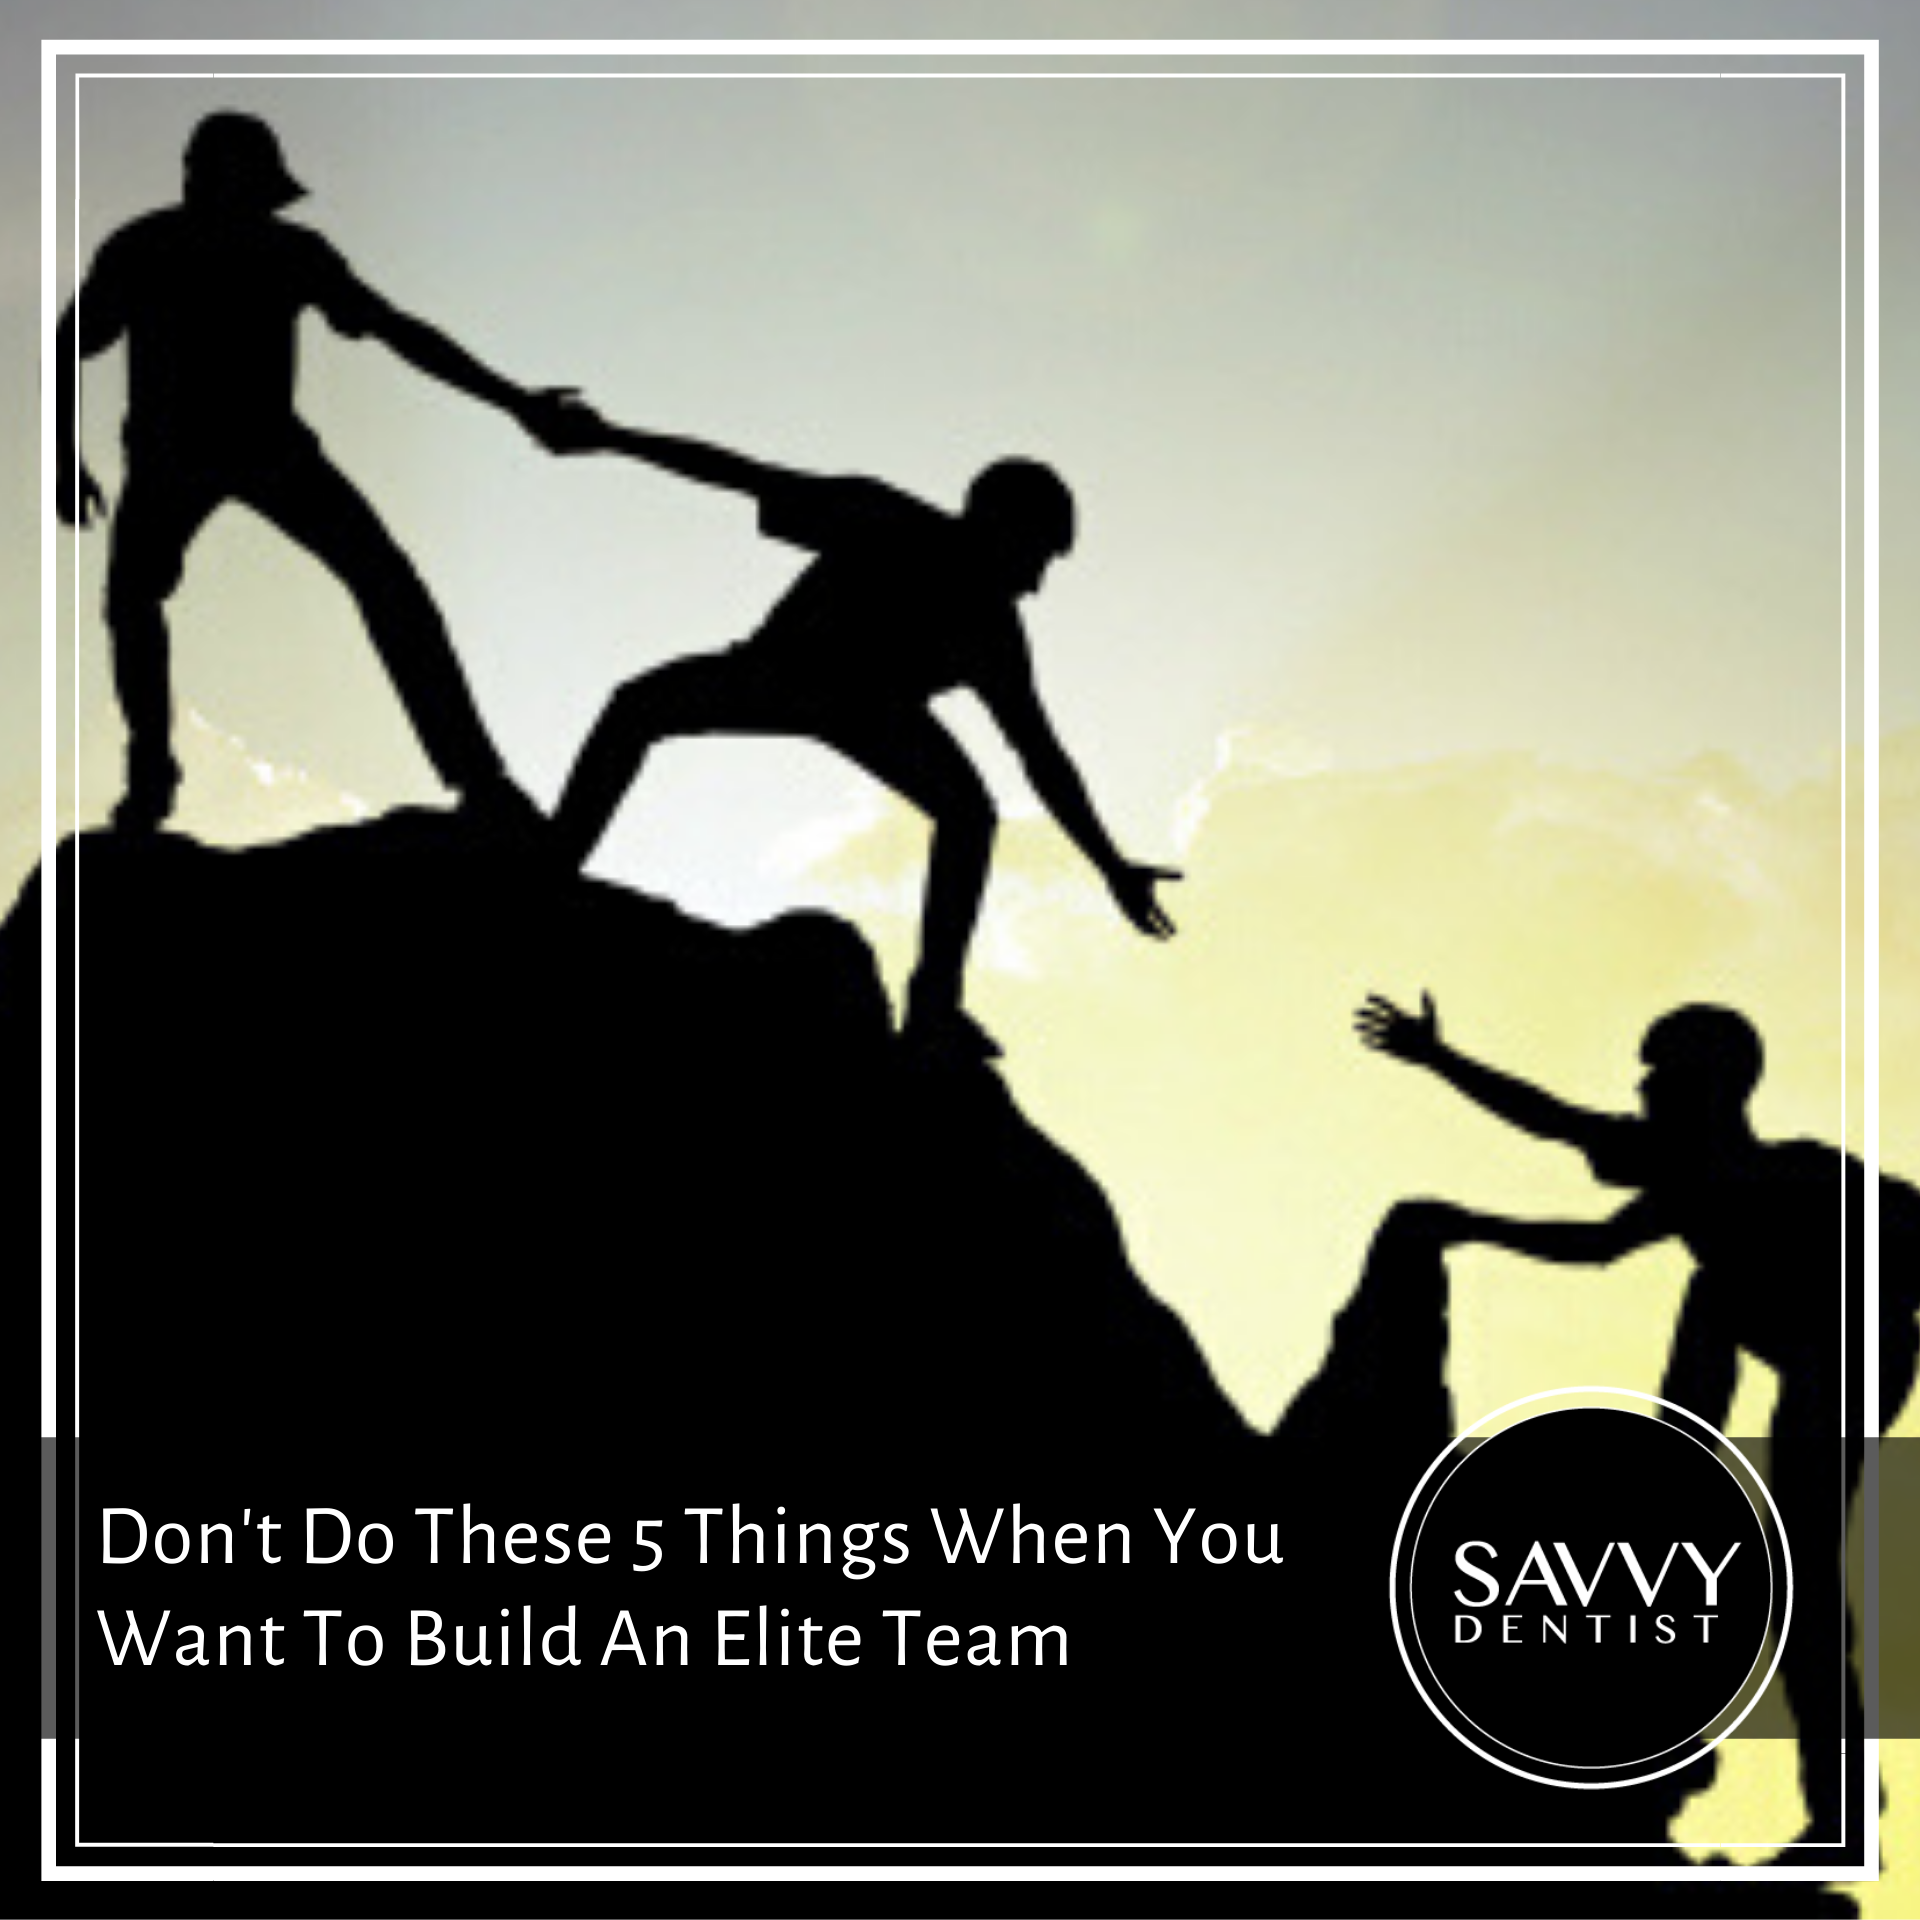 Don’t Do These 5 Things When You Want To Build An Elite Team